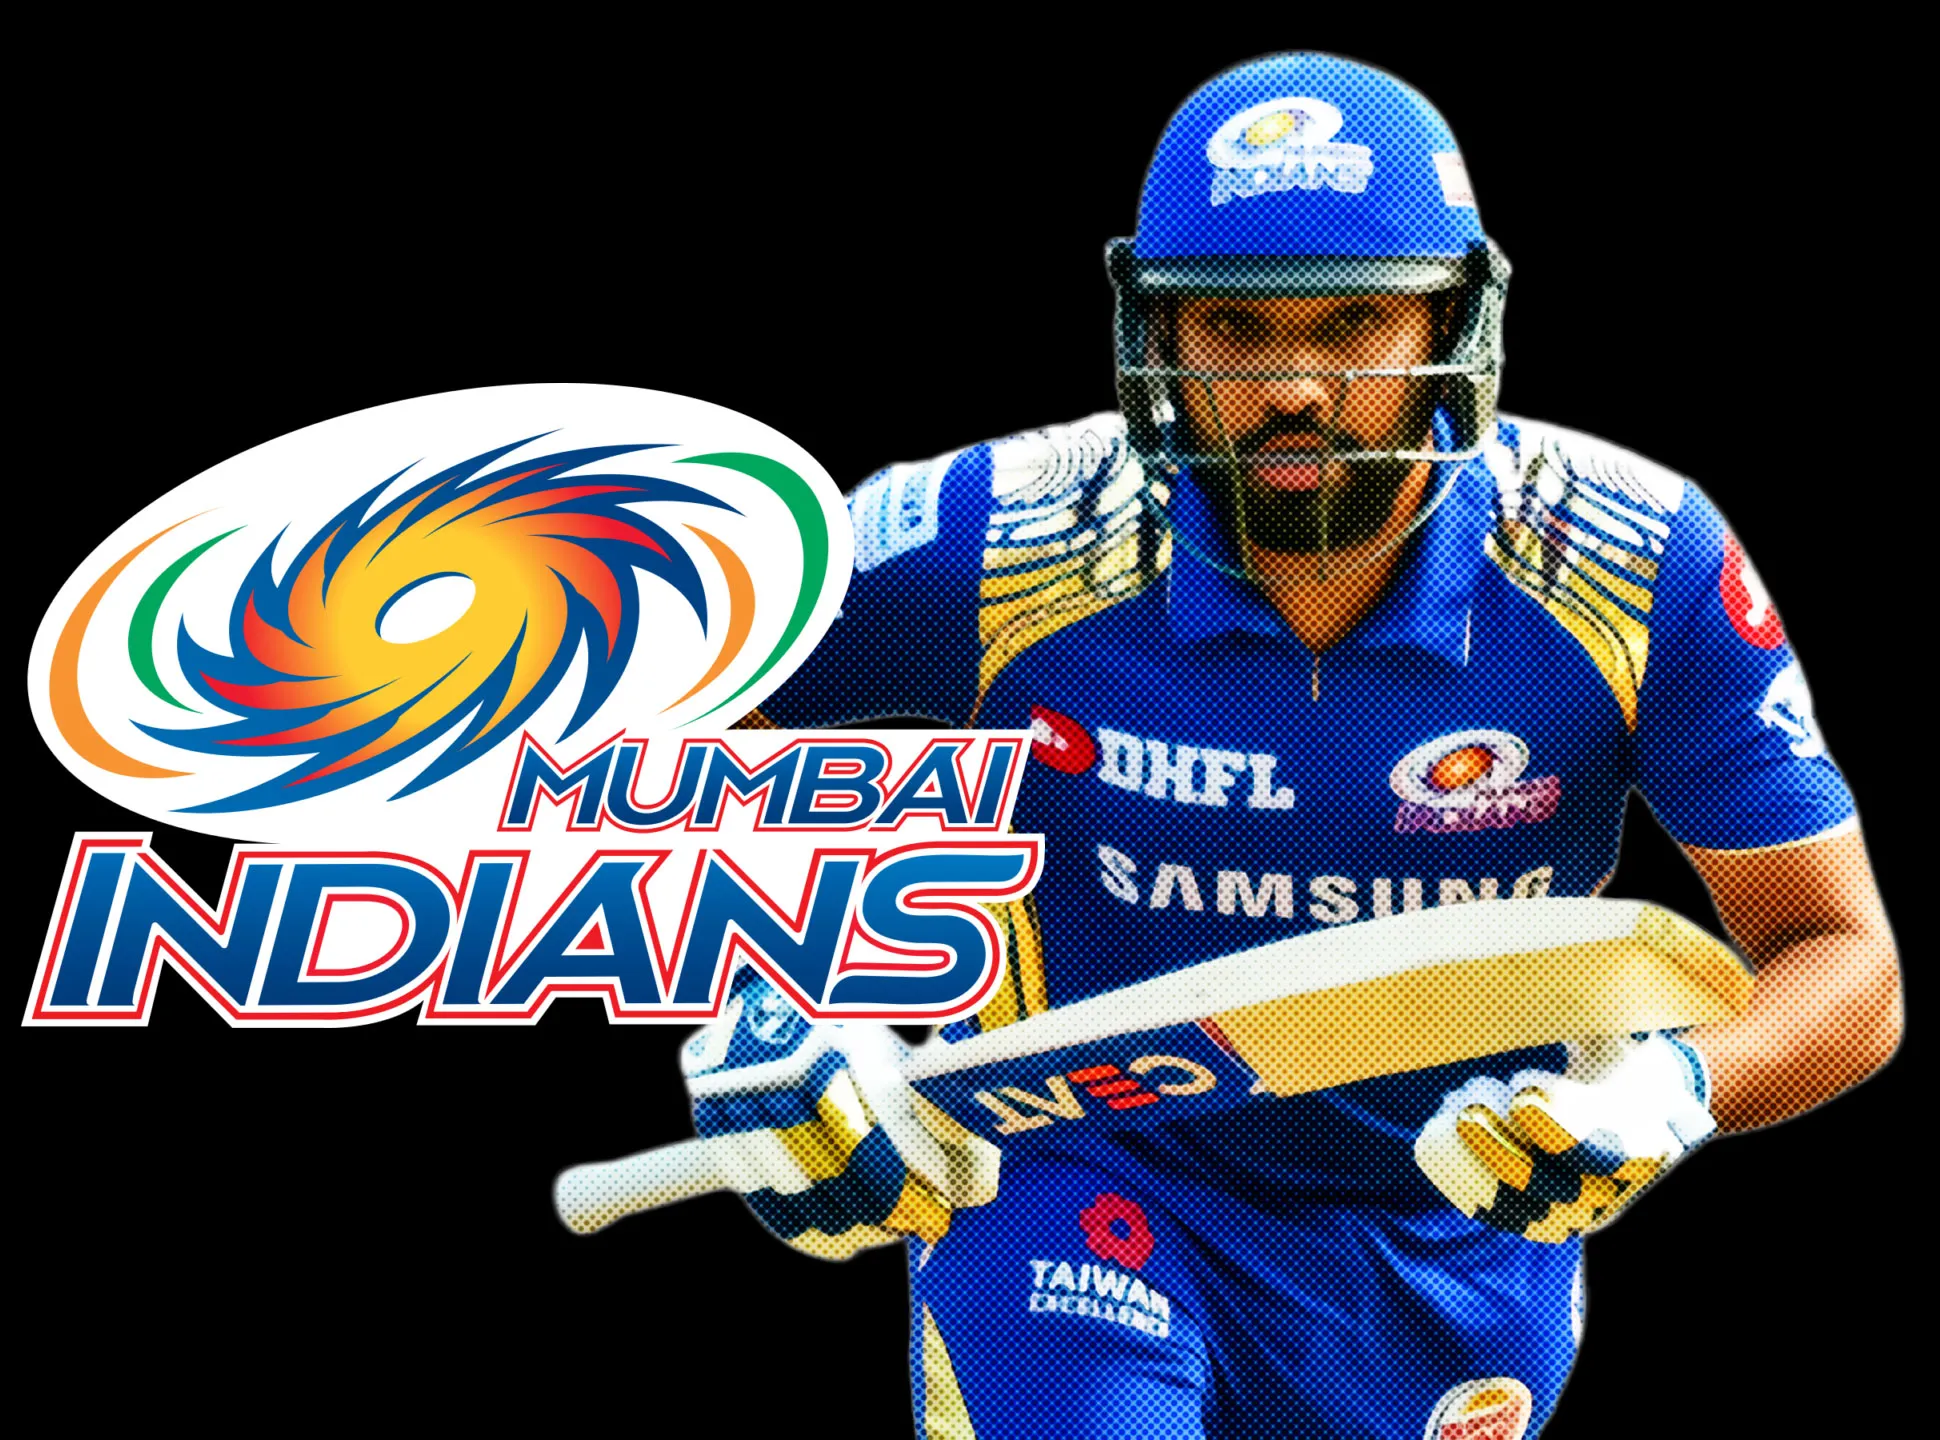 One of the favorites of the IPL - the Mumbai Indians team.